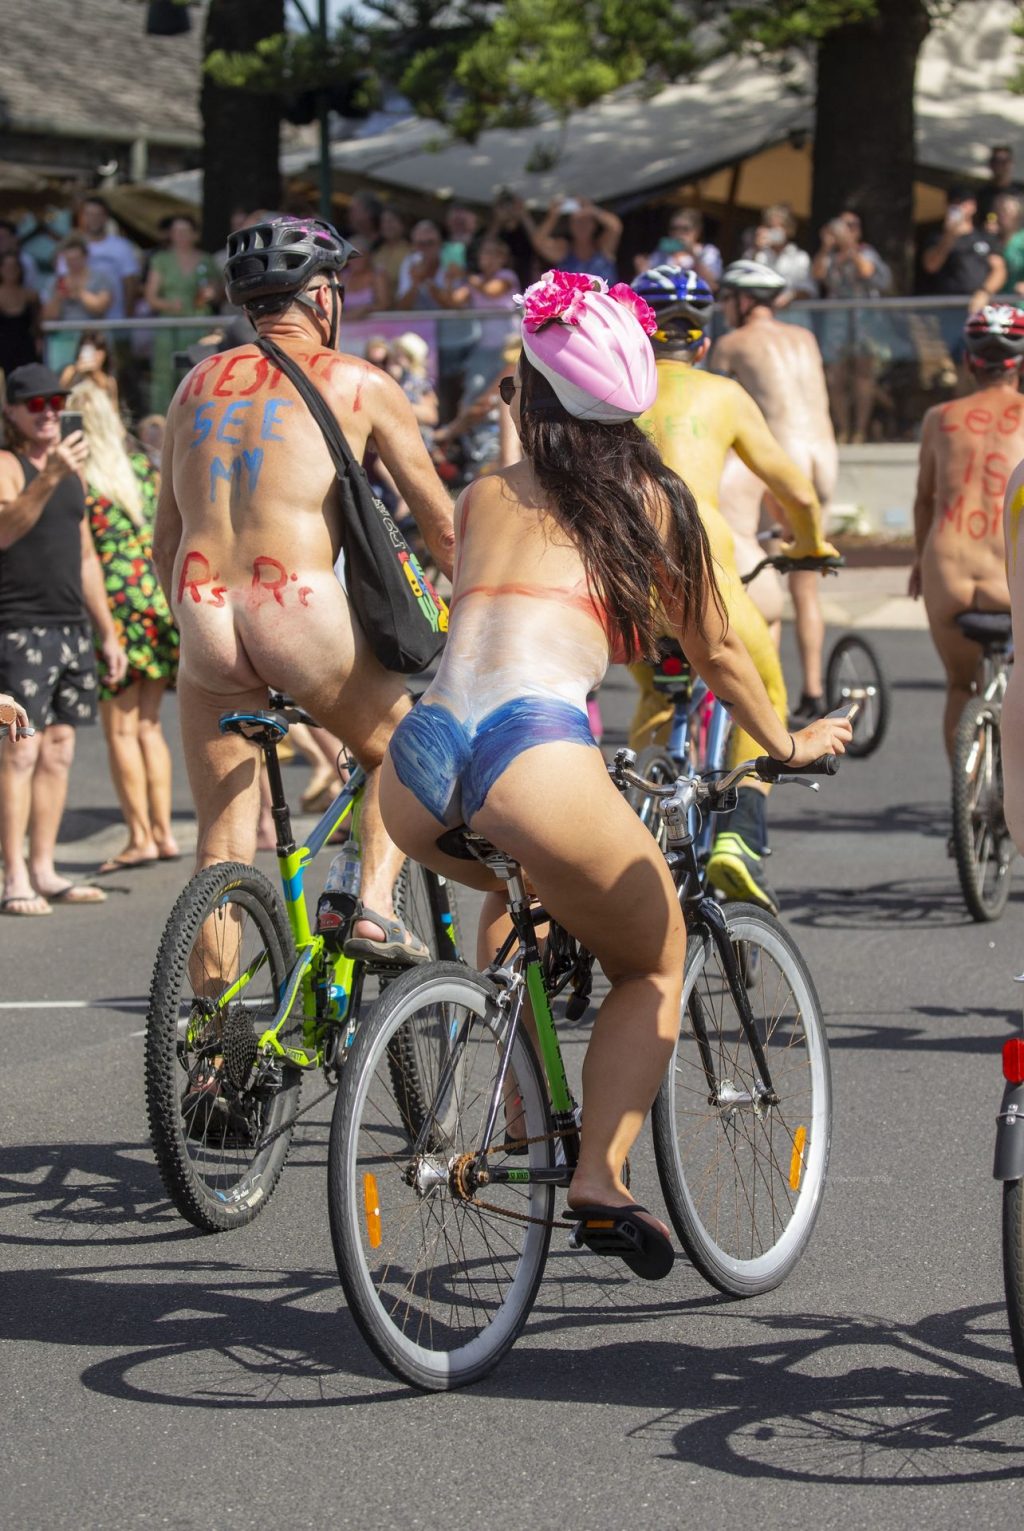 Cyclists Bare All As They Take Part in World Naked Bike Ride Around Byron Bay (41 Photos)